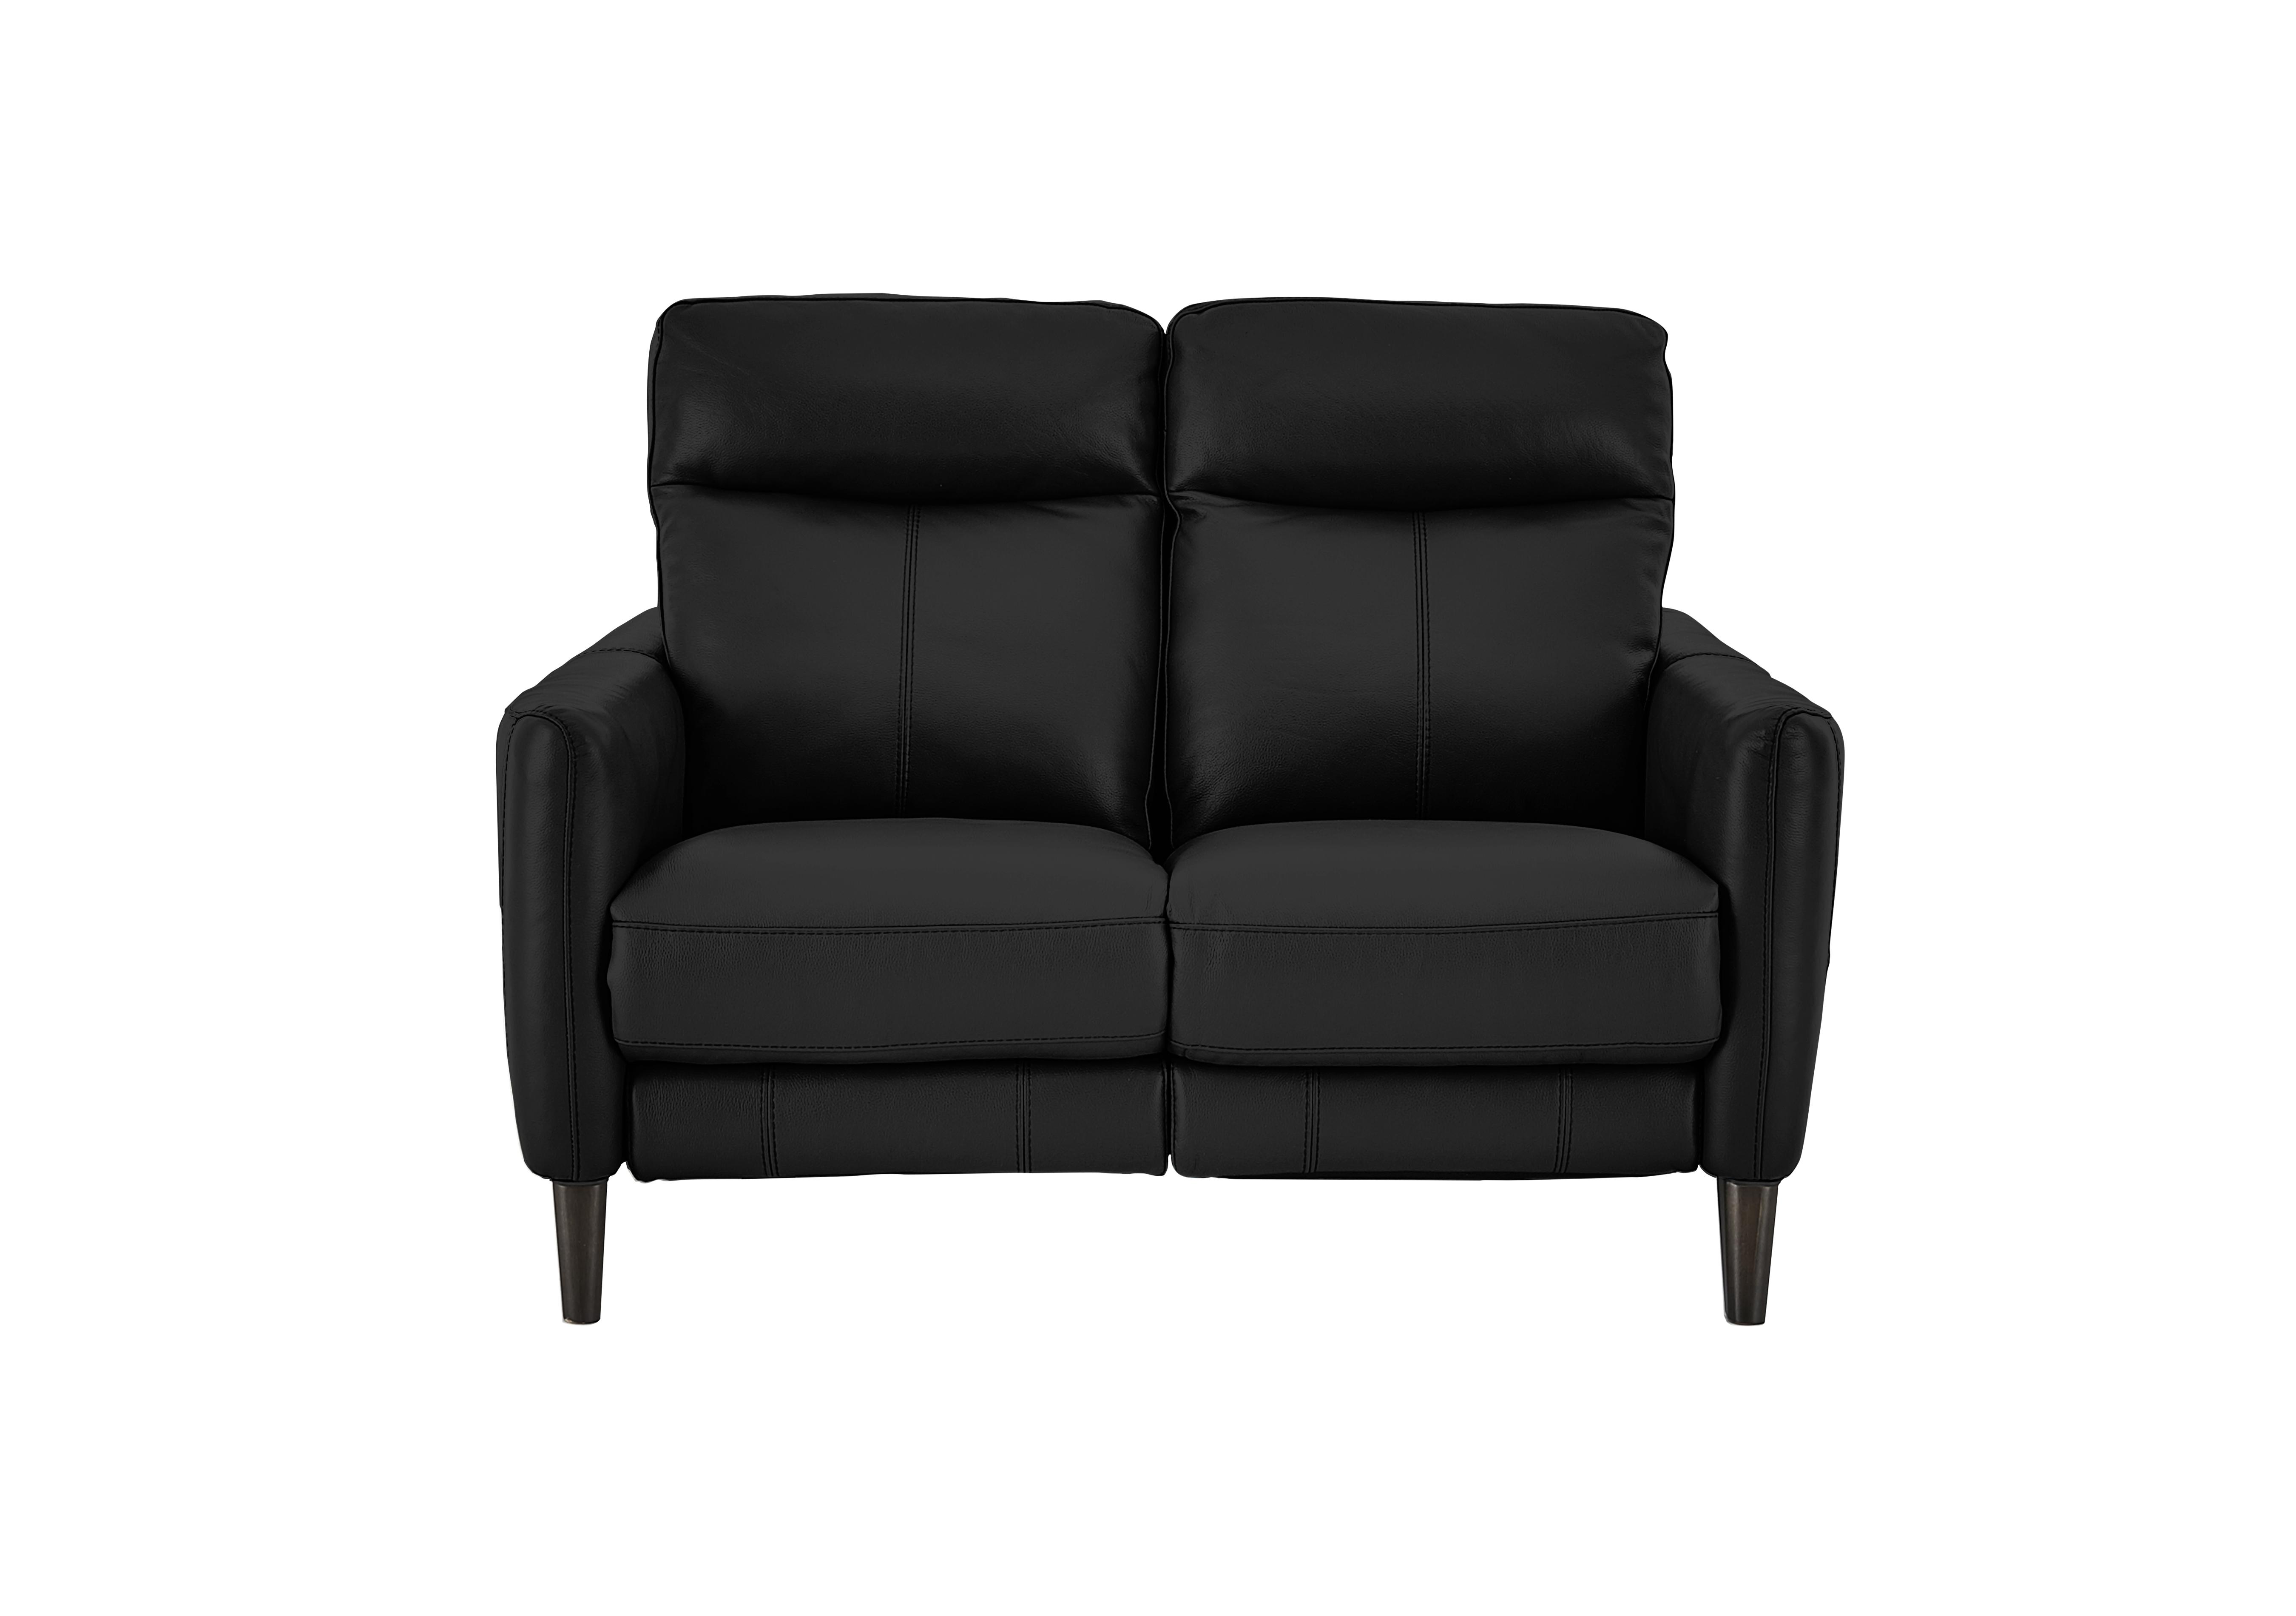 Compact Collection Petit 2 Seater Leather Sofa in Bv-3500 Classic Black on Furniture Village